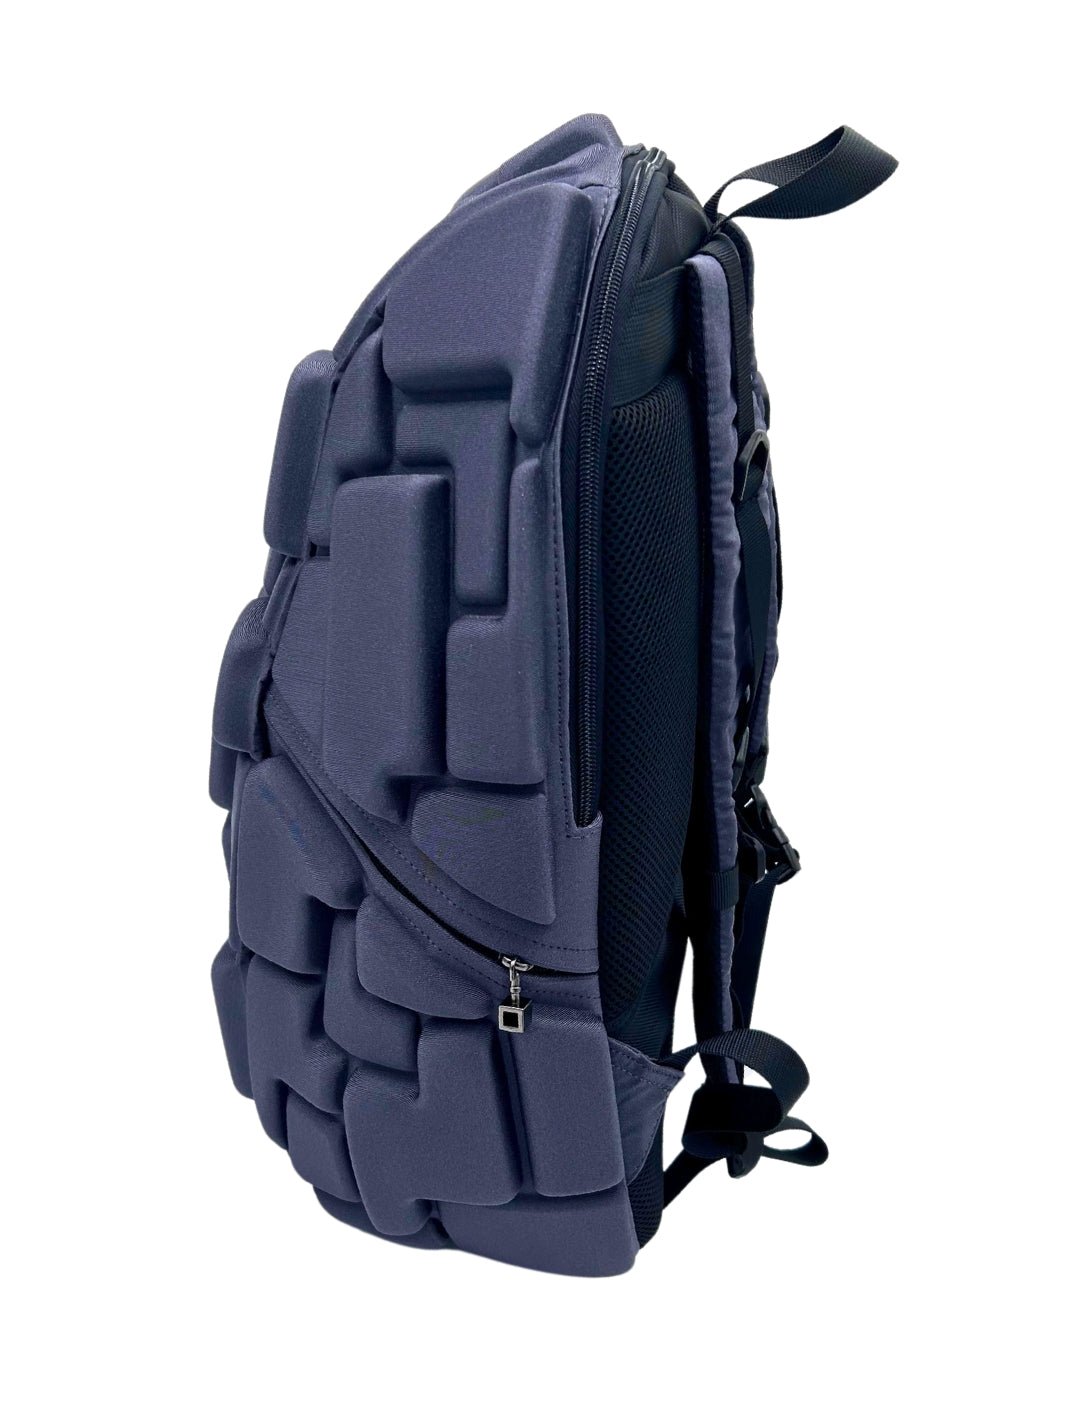 Outer Limits gray backpack - Madpax